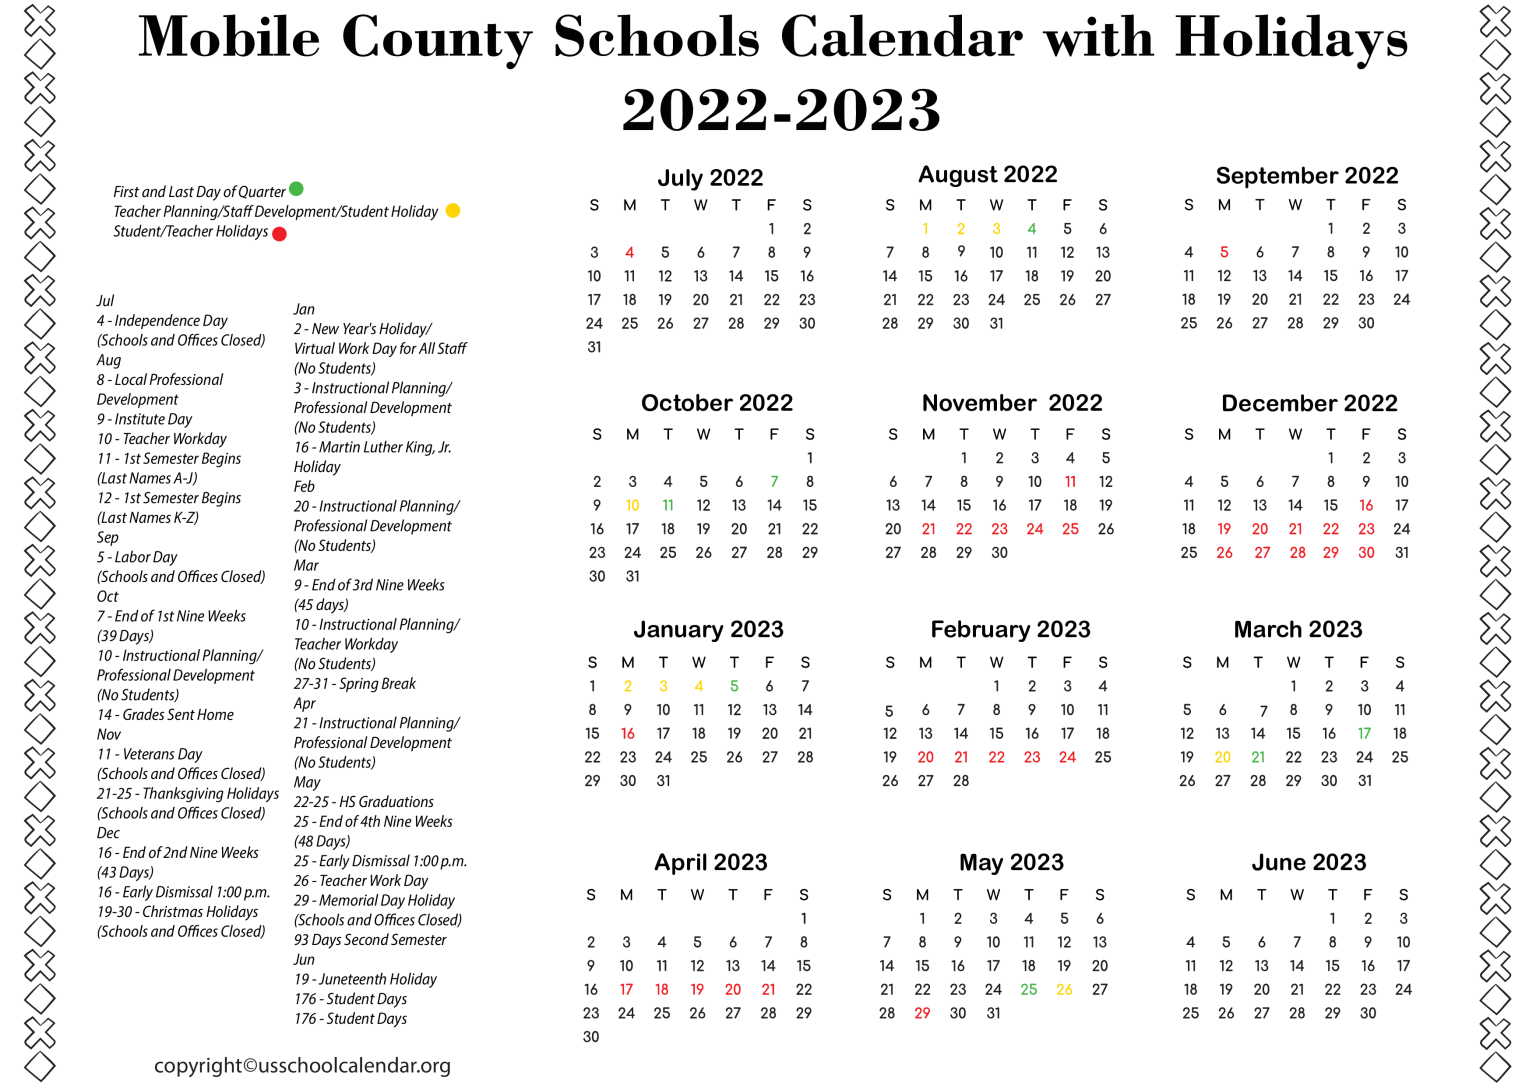 [MCPSS] Mobile County Schools Calendar with Holidays 2023